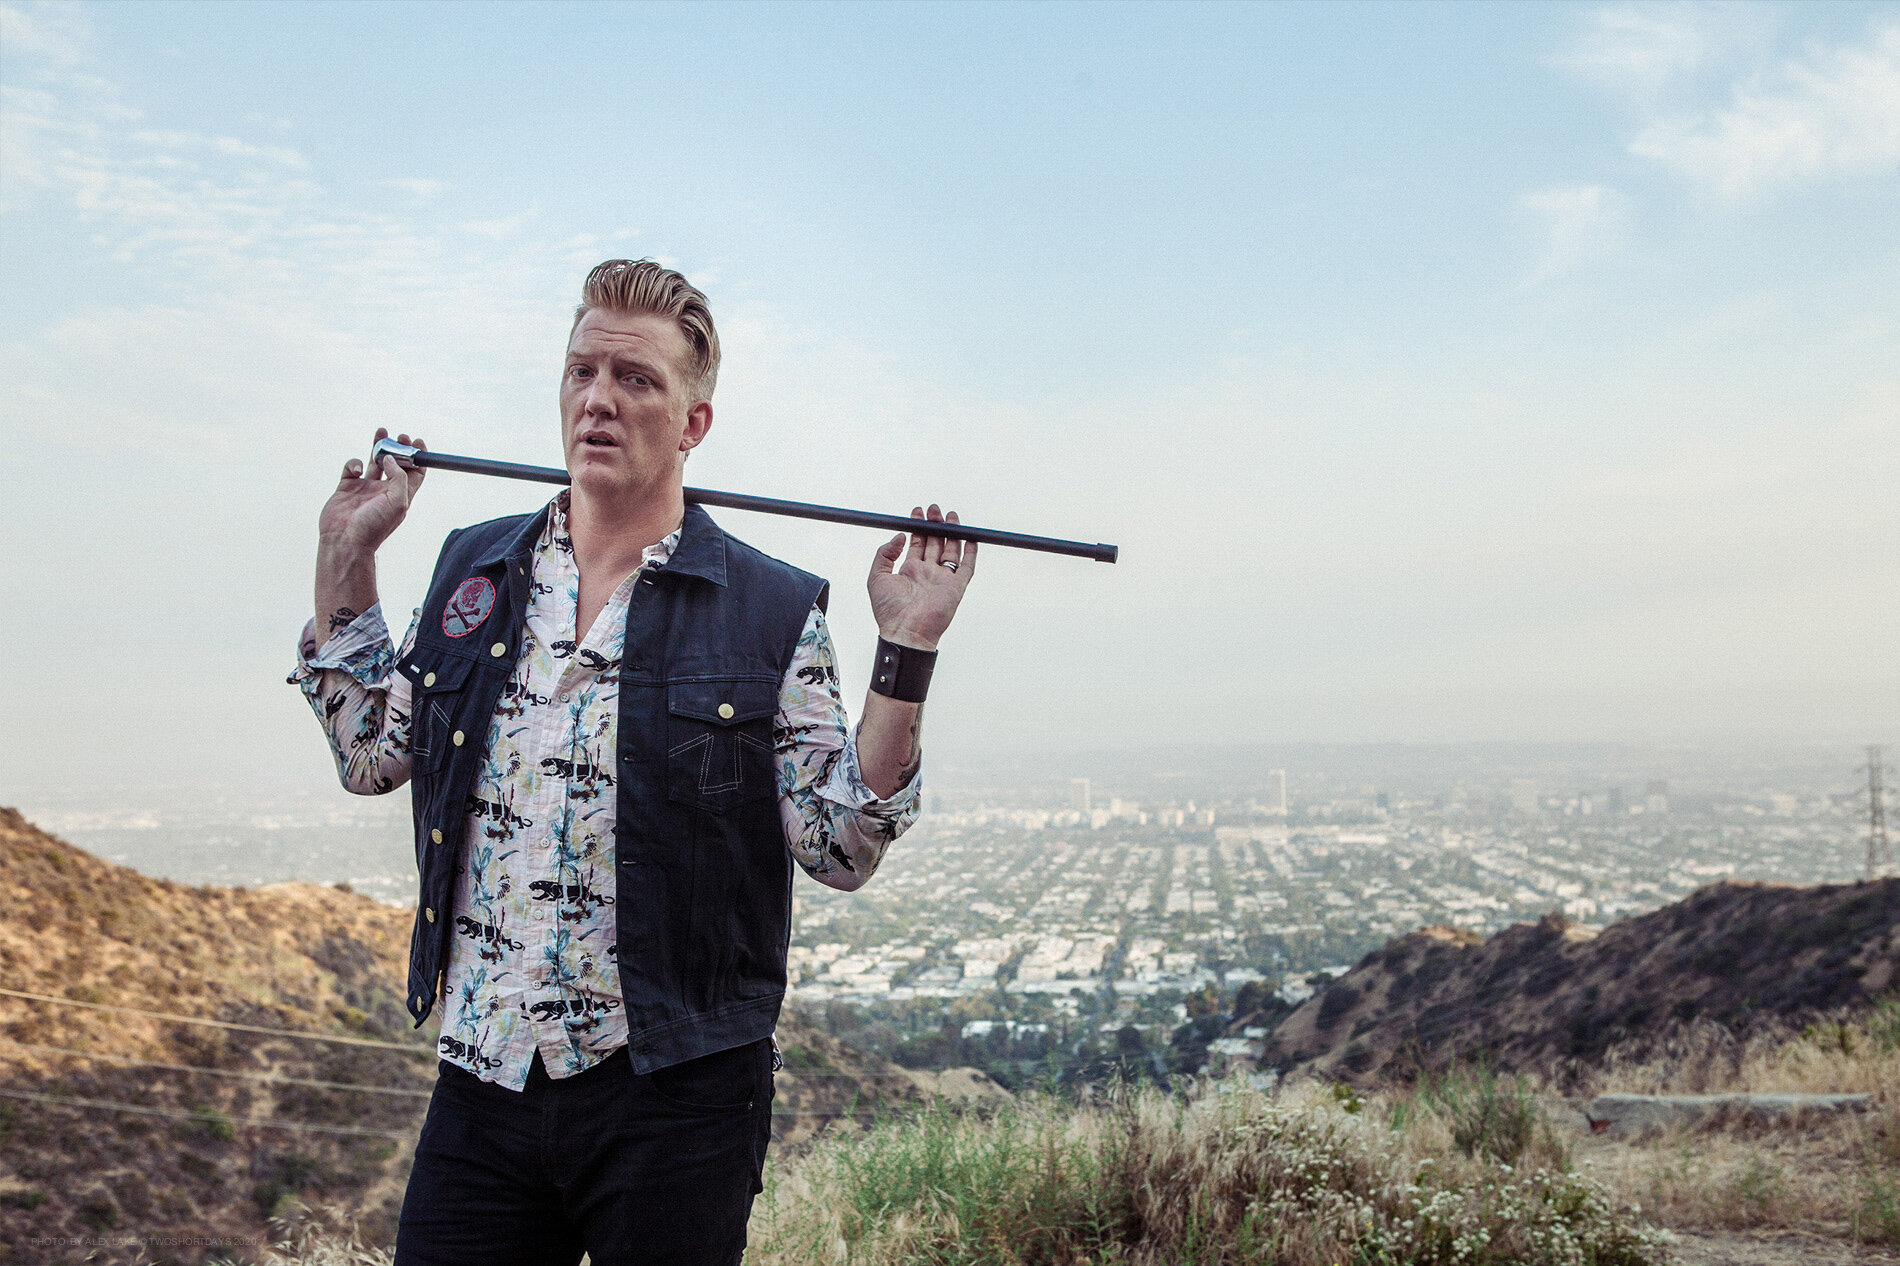 josh_homme_photography_copyright_ALEX_LAKE_do_not_reproduce_without_permission_TWOSHORTDAYS.jpg